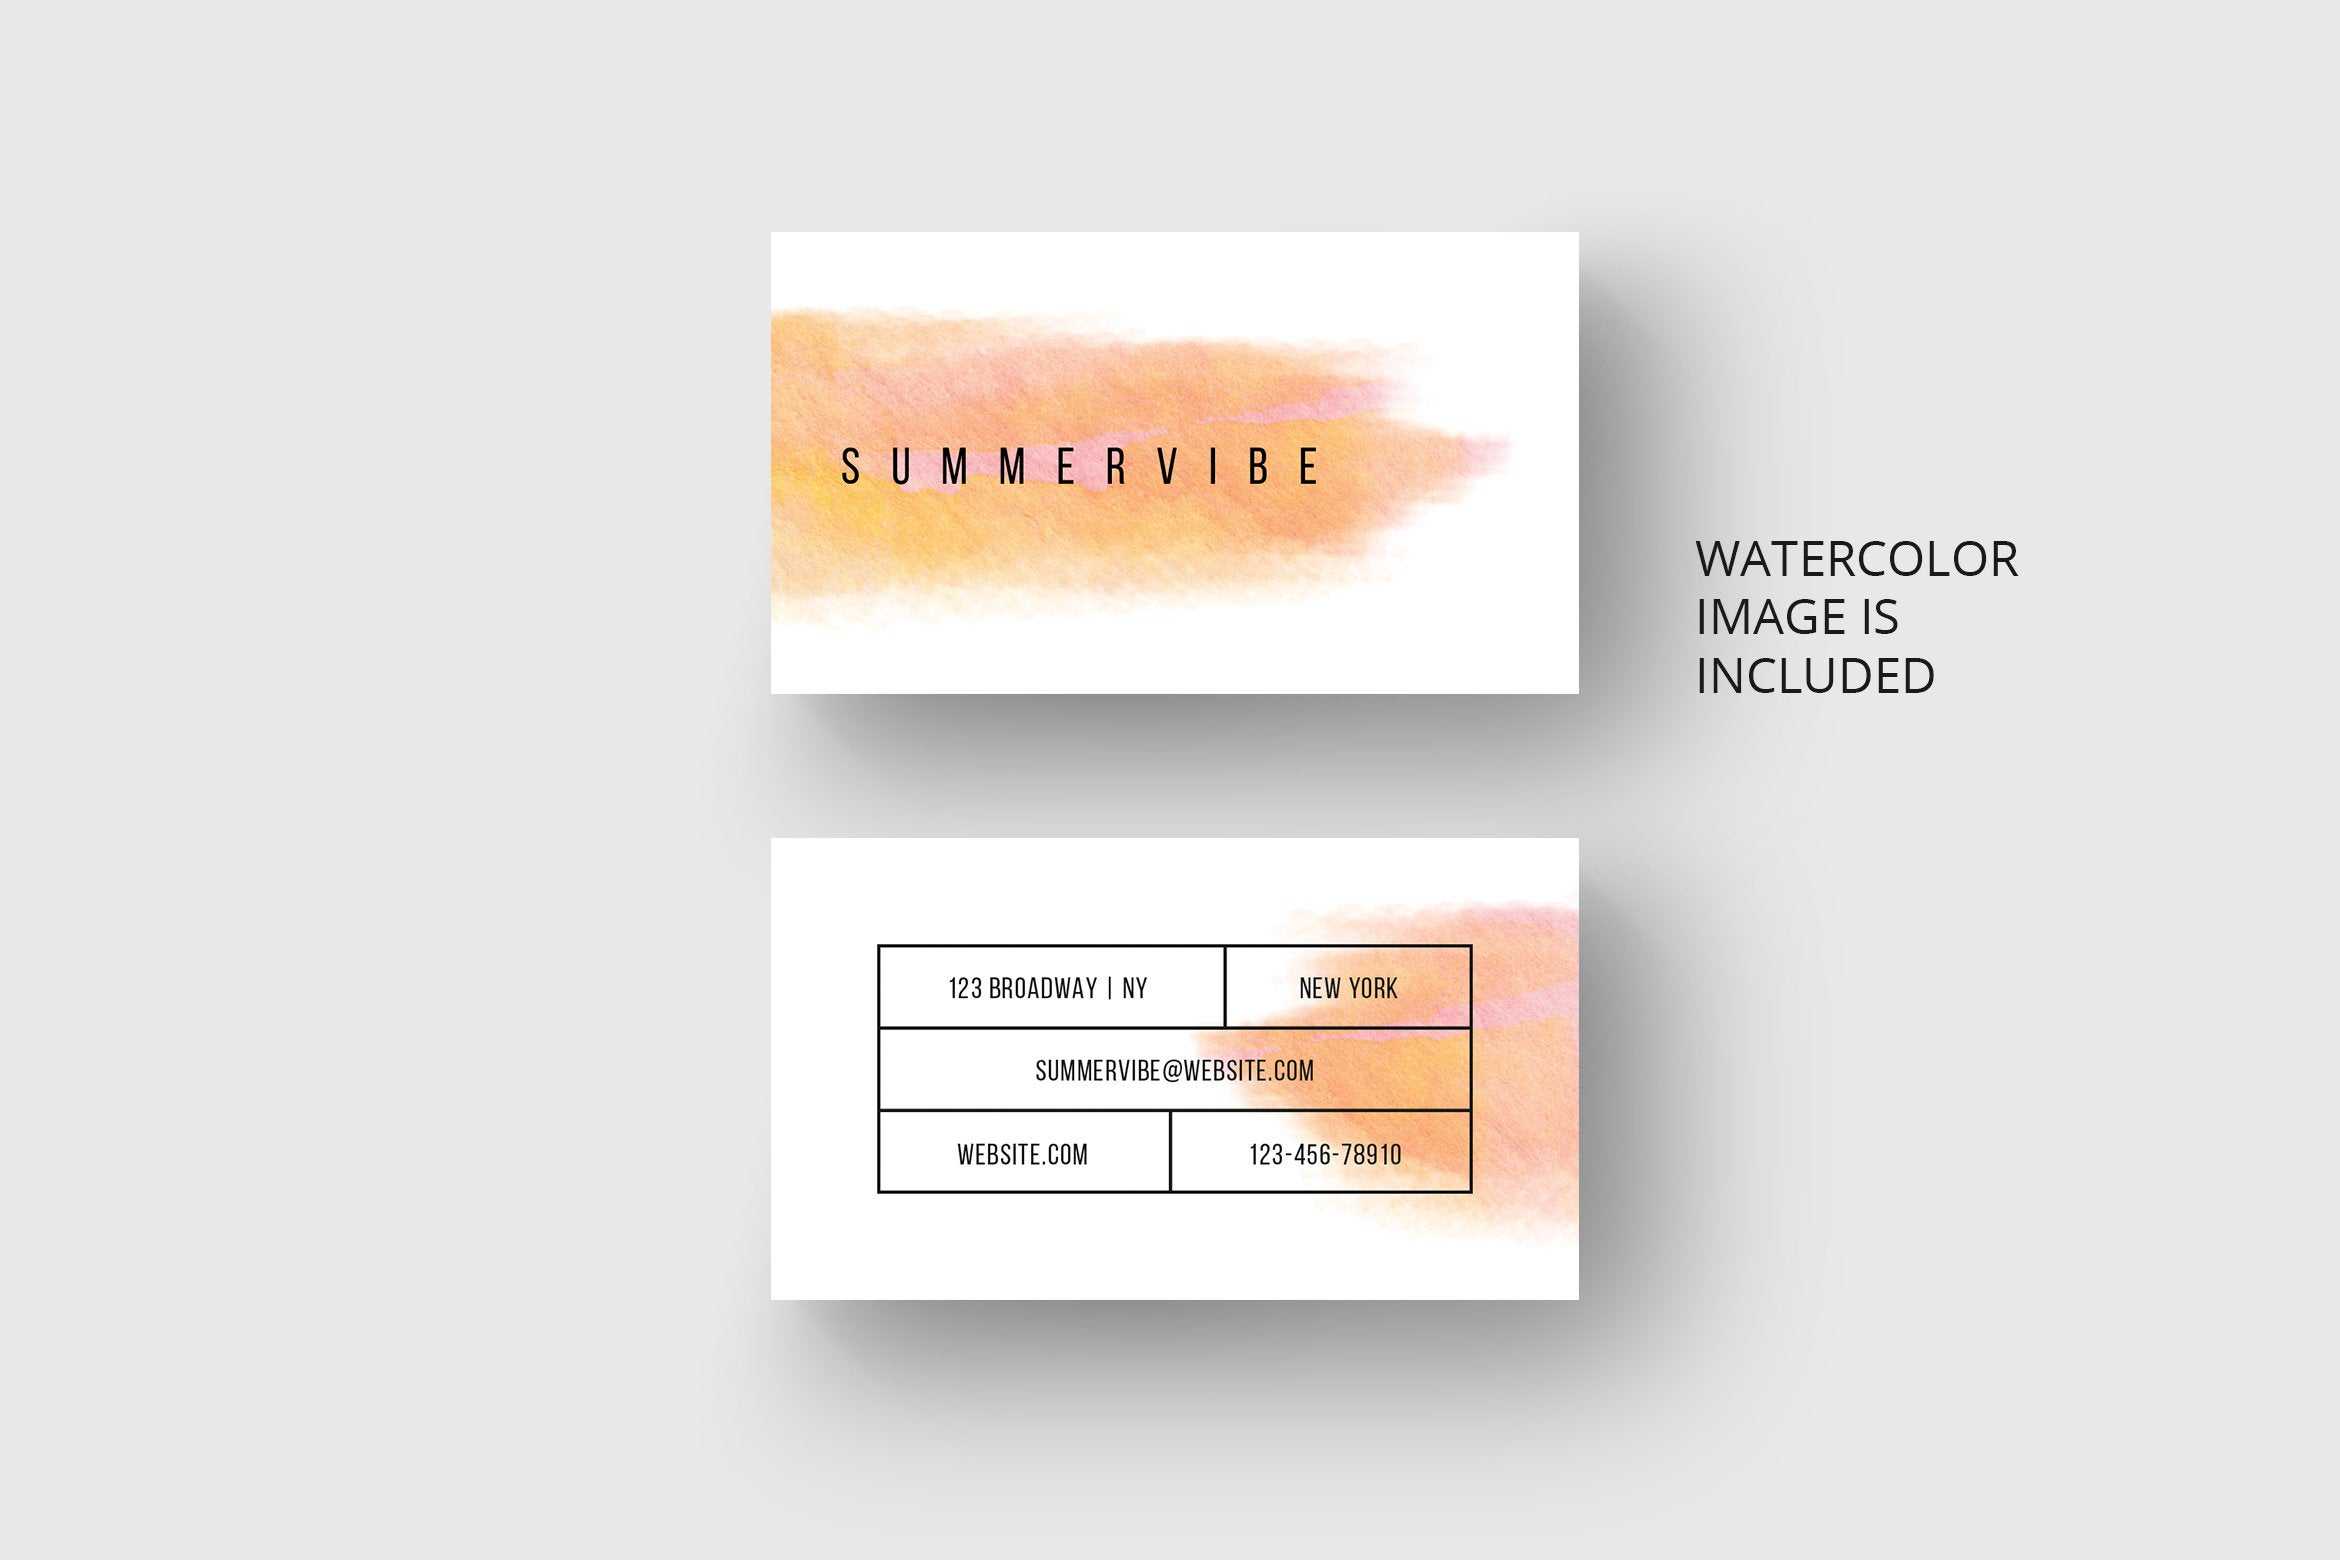 Business Card Template With Orange Watercolor * Eu & Us Size * Photoshop With Business Card Size Photoshop Template